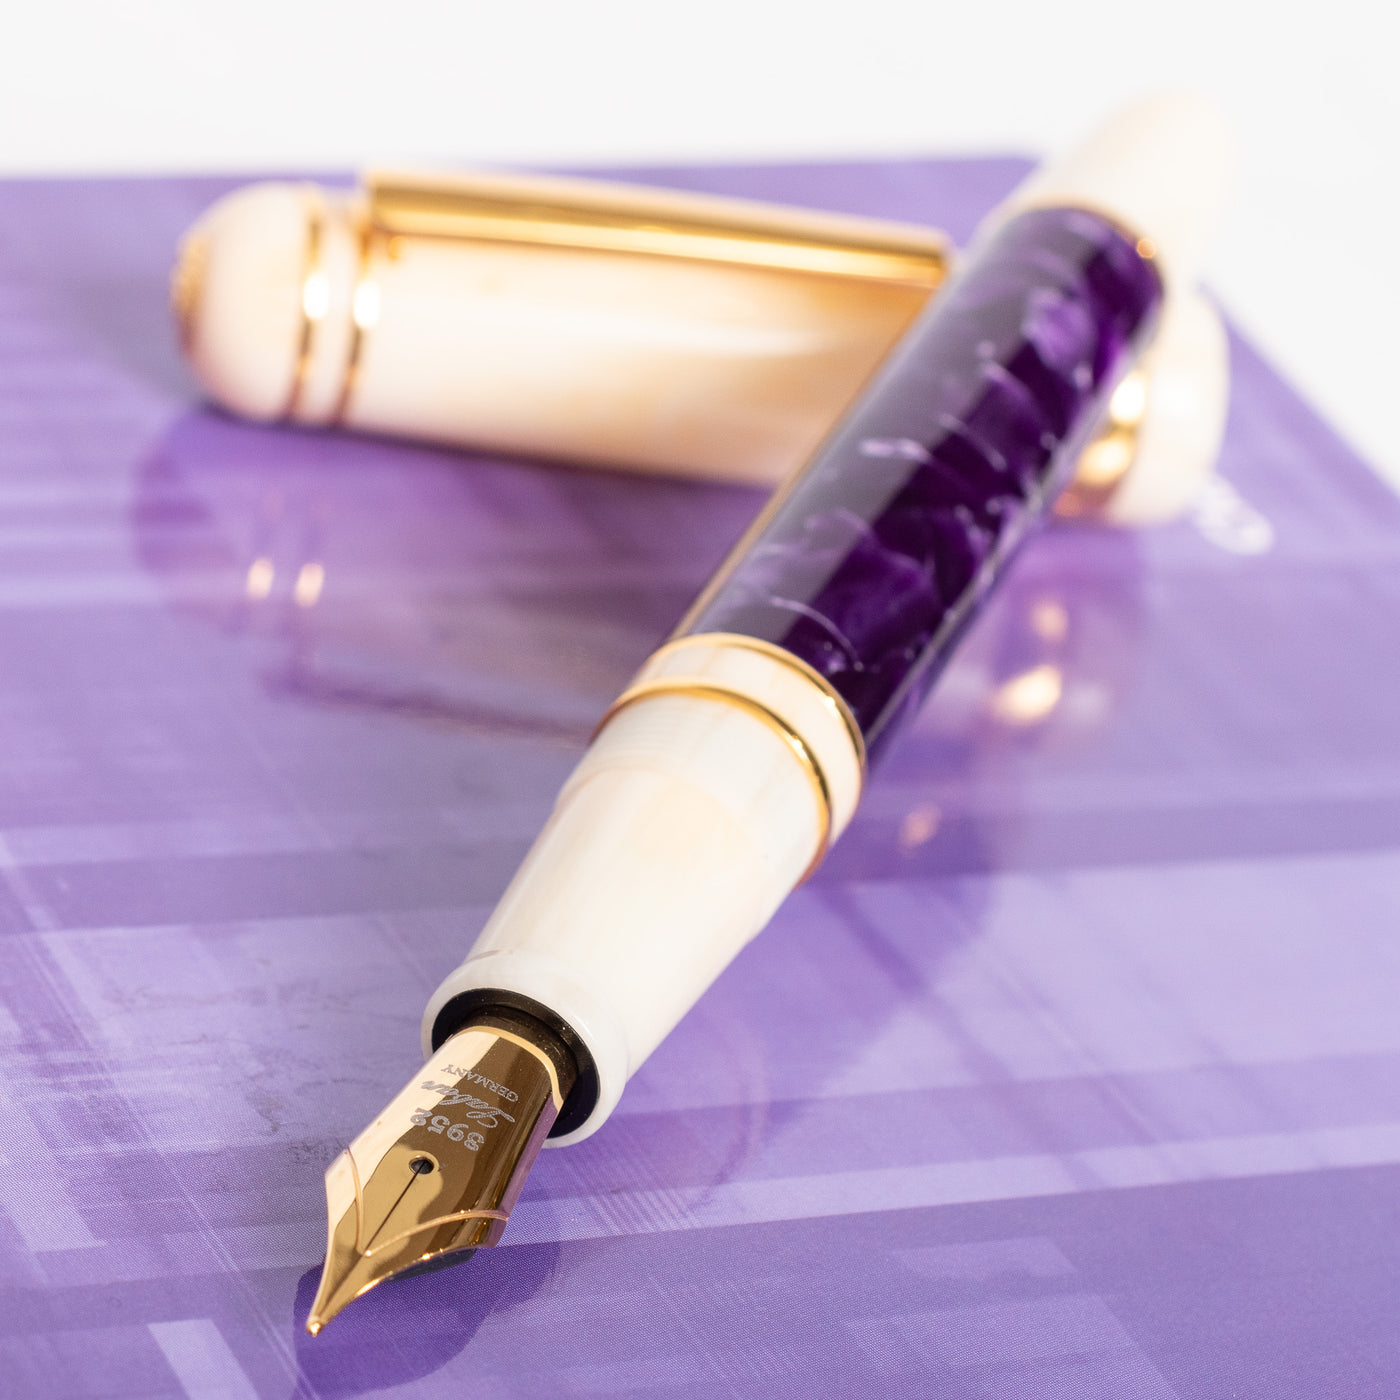 Laban 325 Fountain Pen - Wisteria gold plated